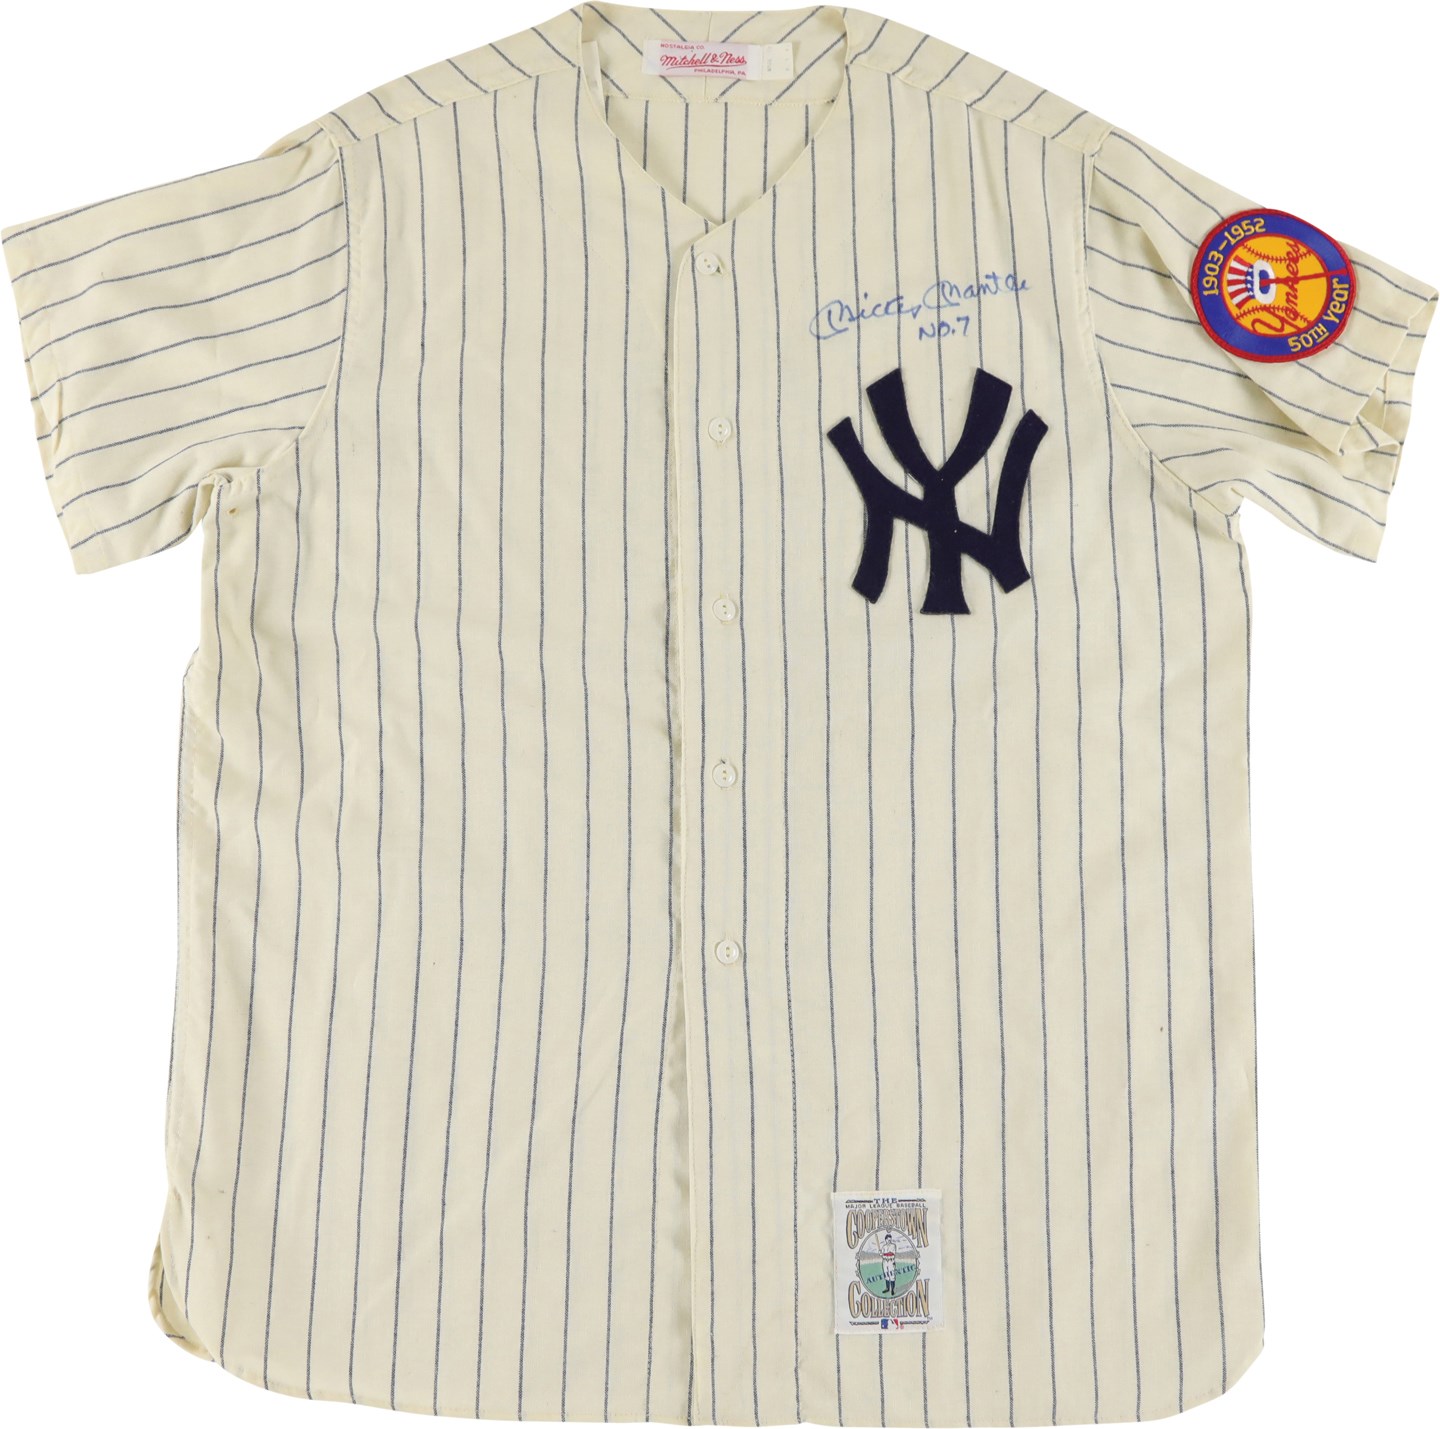 - 1951 Mickey Mantle Signed New York Yankees Jersey with No. 7 Inscription (PSA)